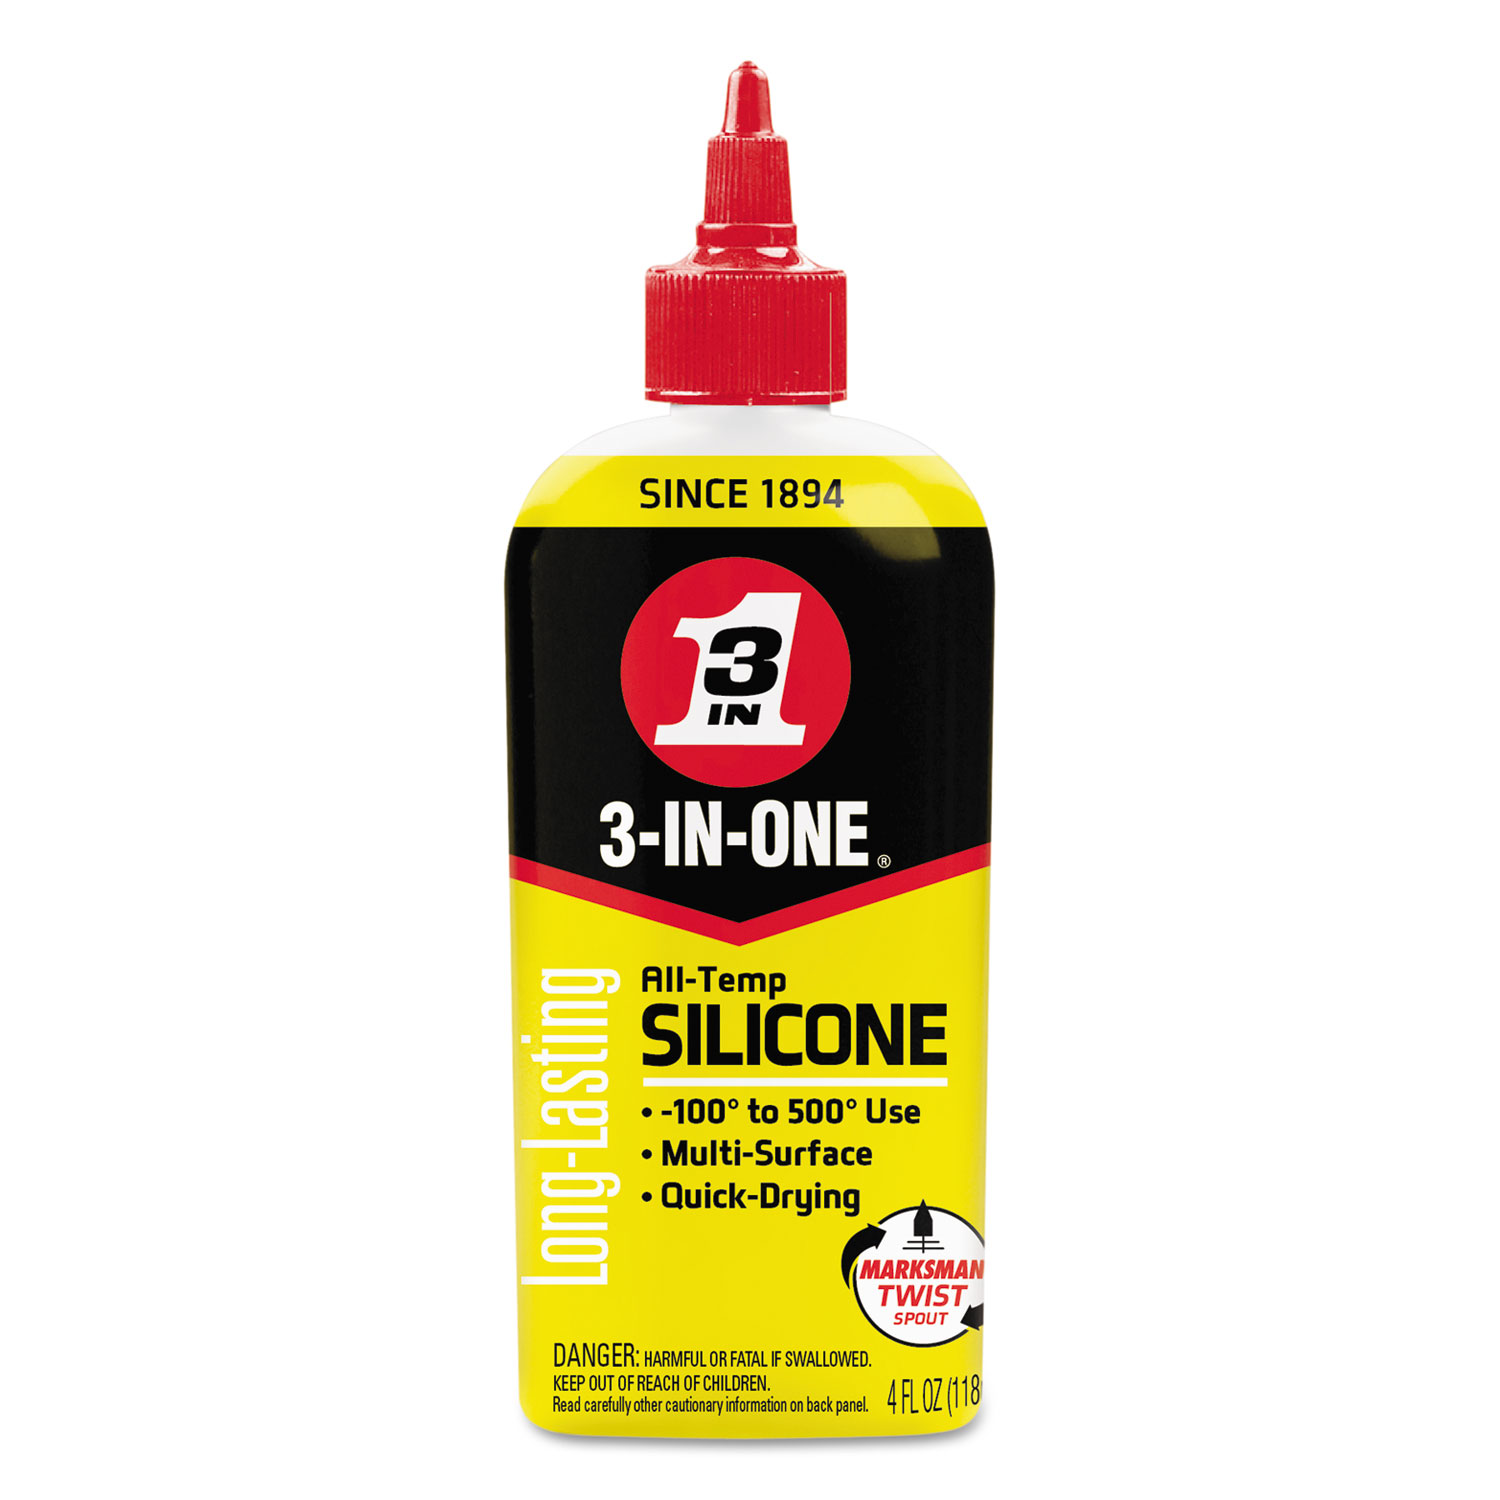 3-IN-ONE Professional Silicone Lubricant, 4 oz Bottle